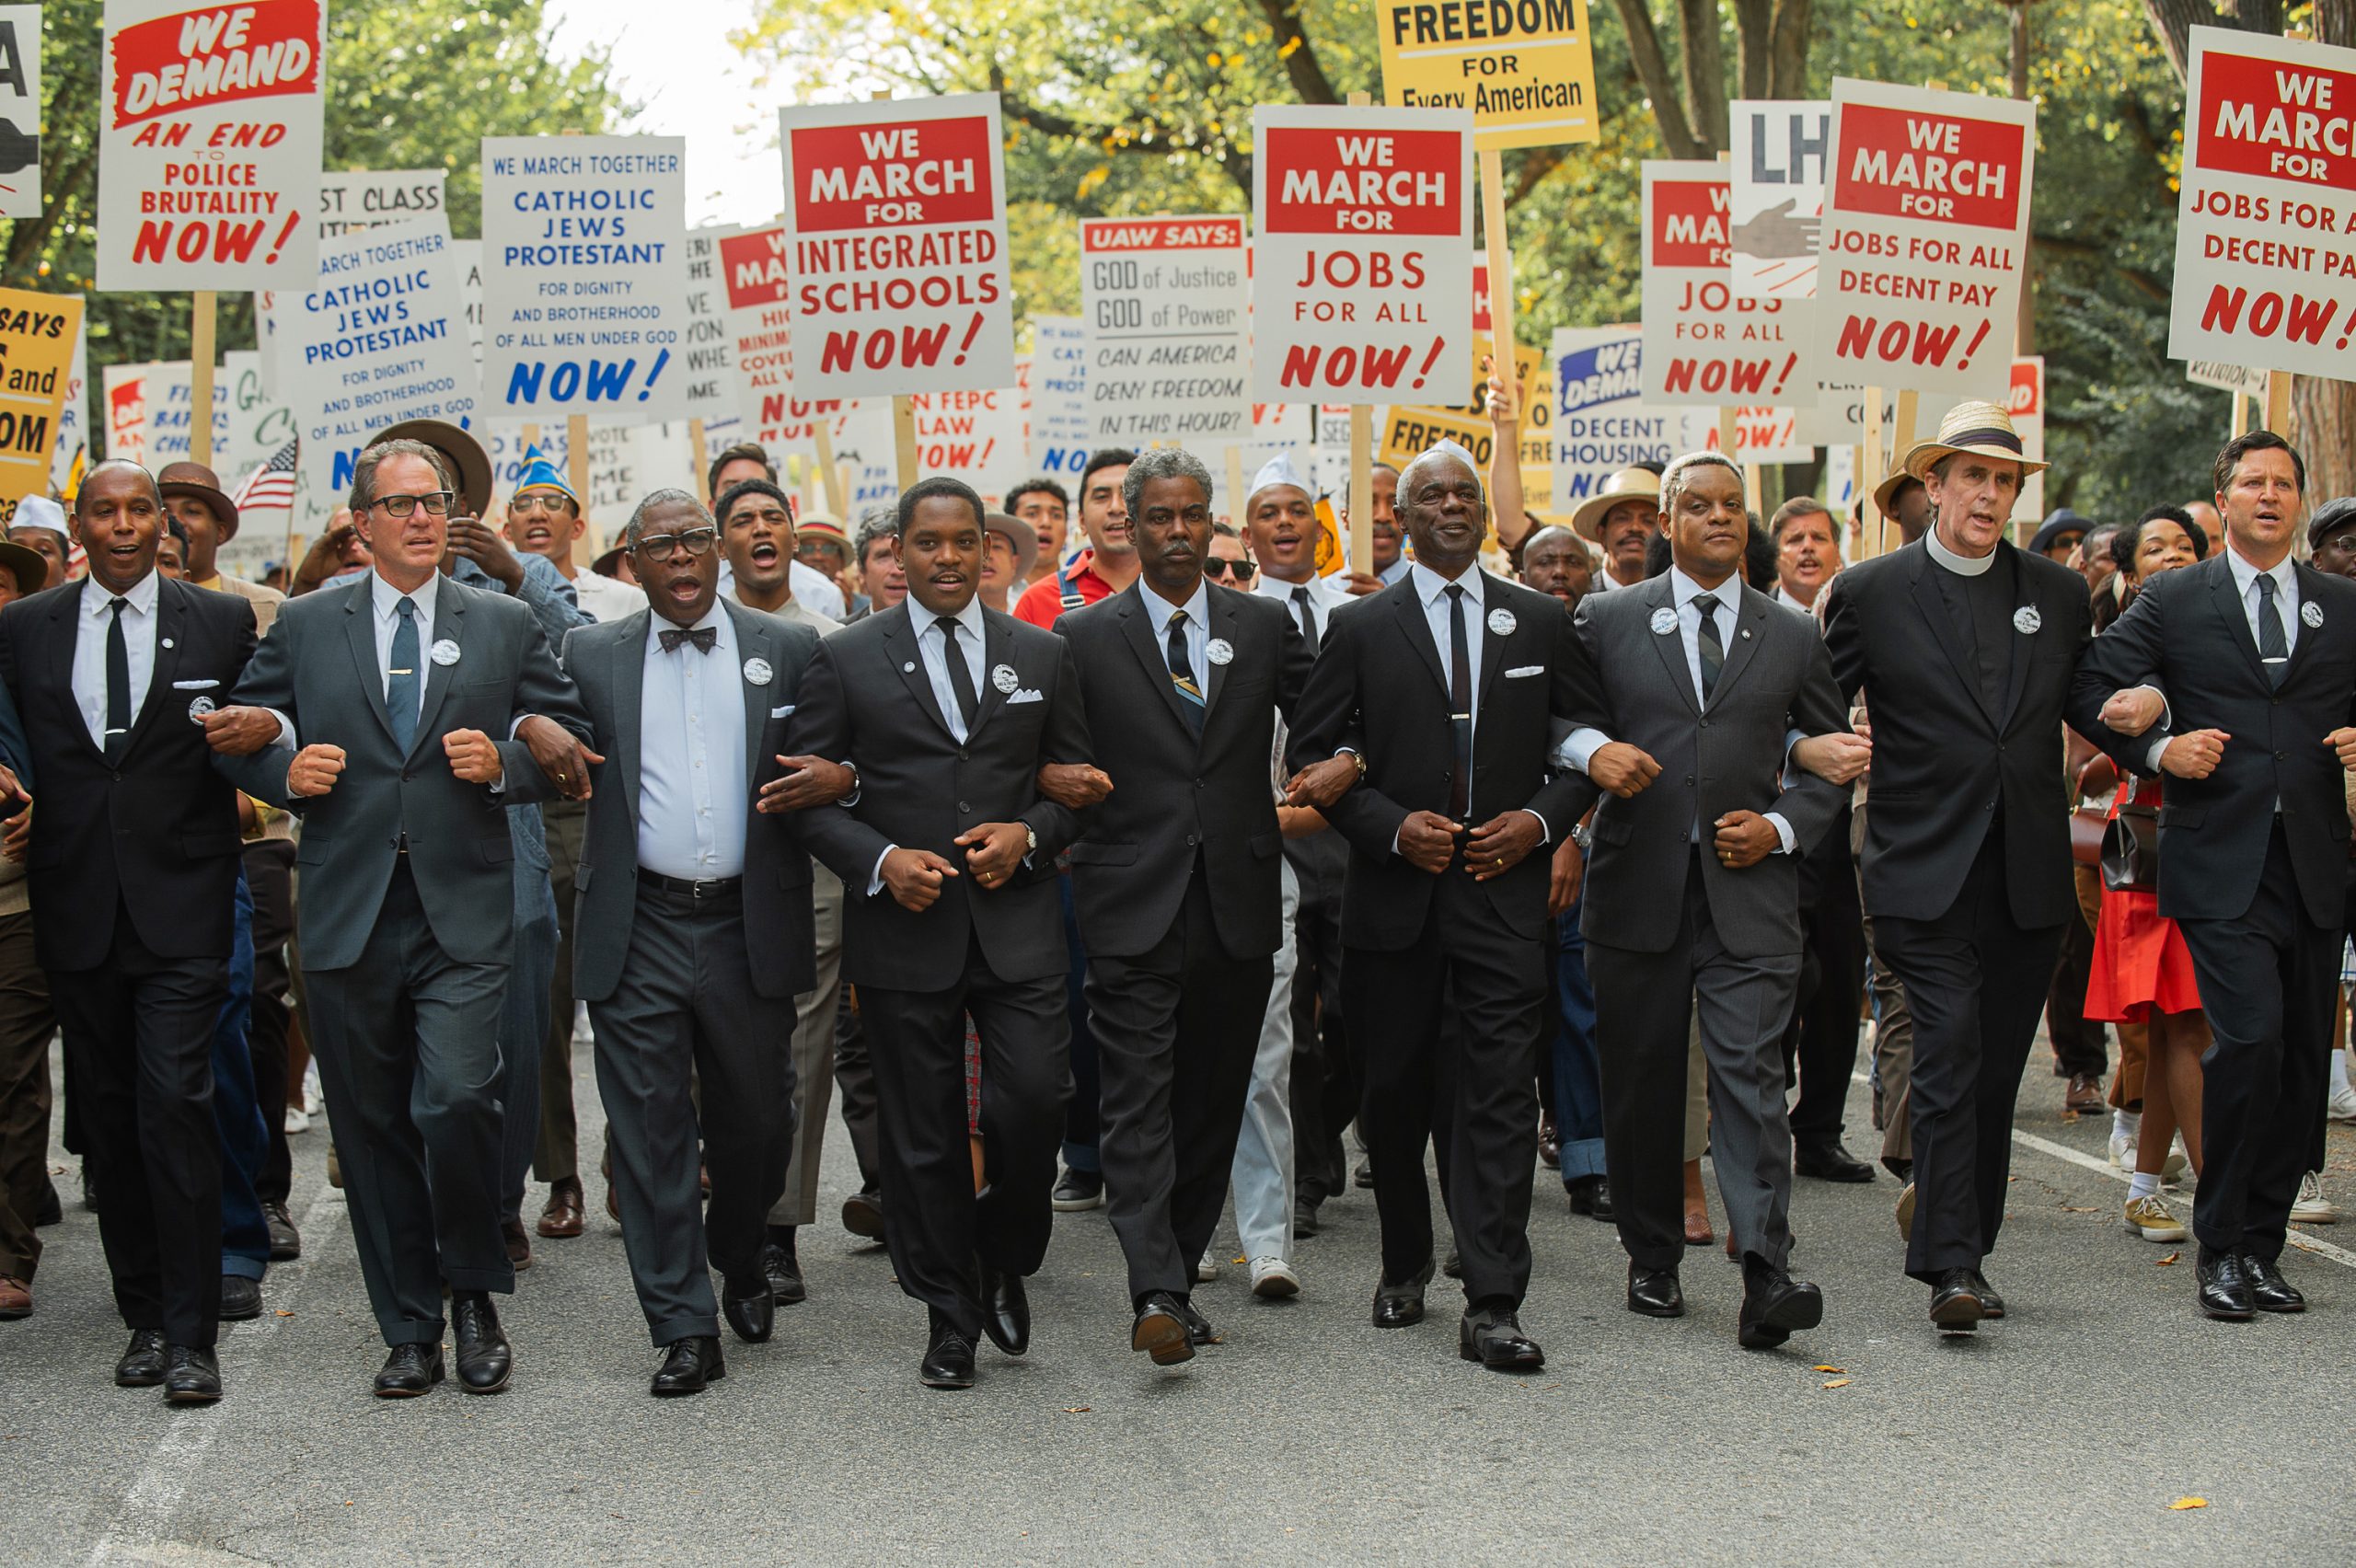 ‘Rustin’ Trailer: Colman Domingo Marches for Equality in Civil Rights Period Piece